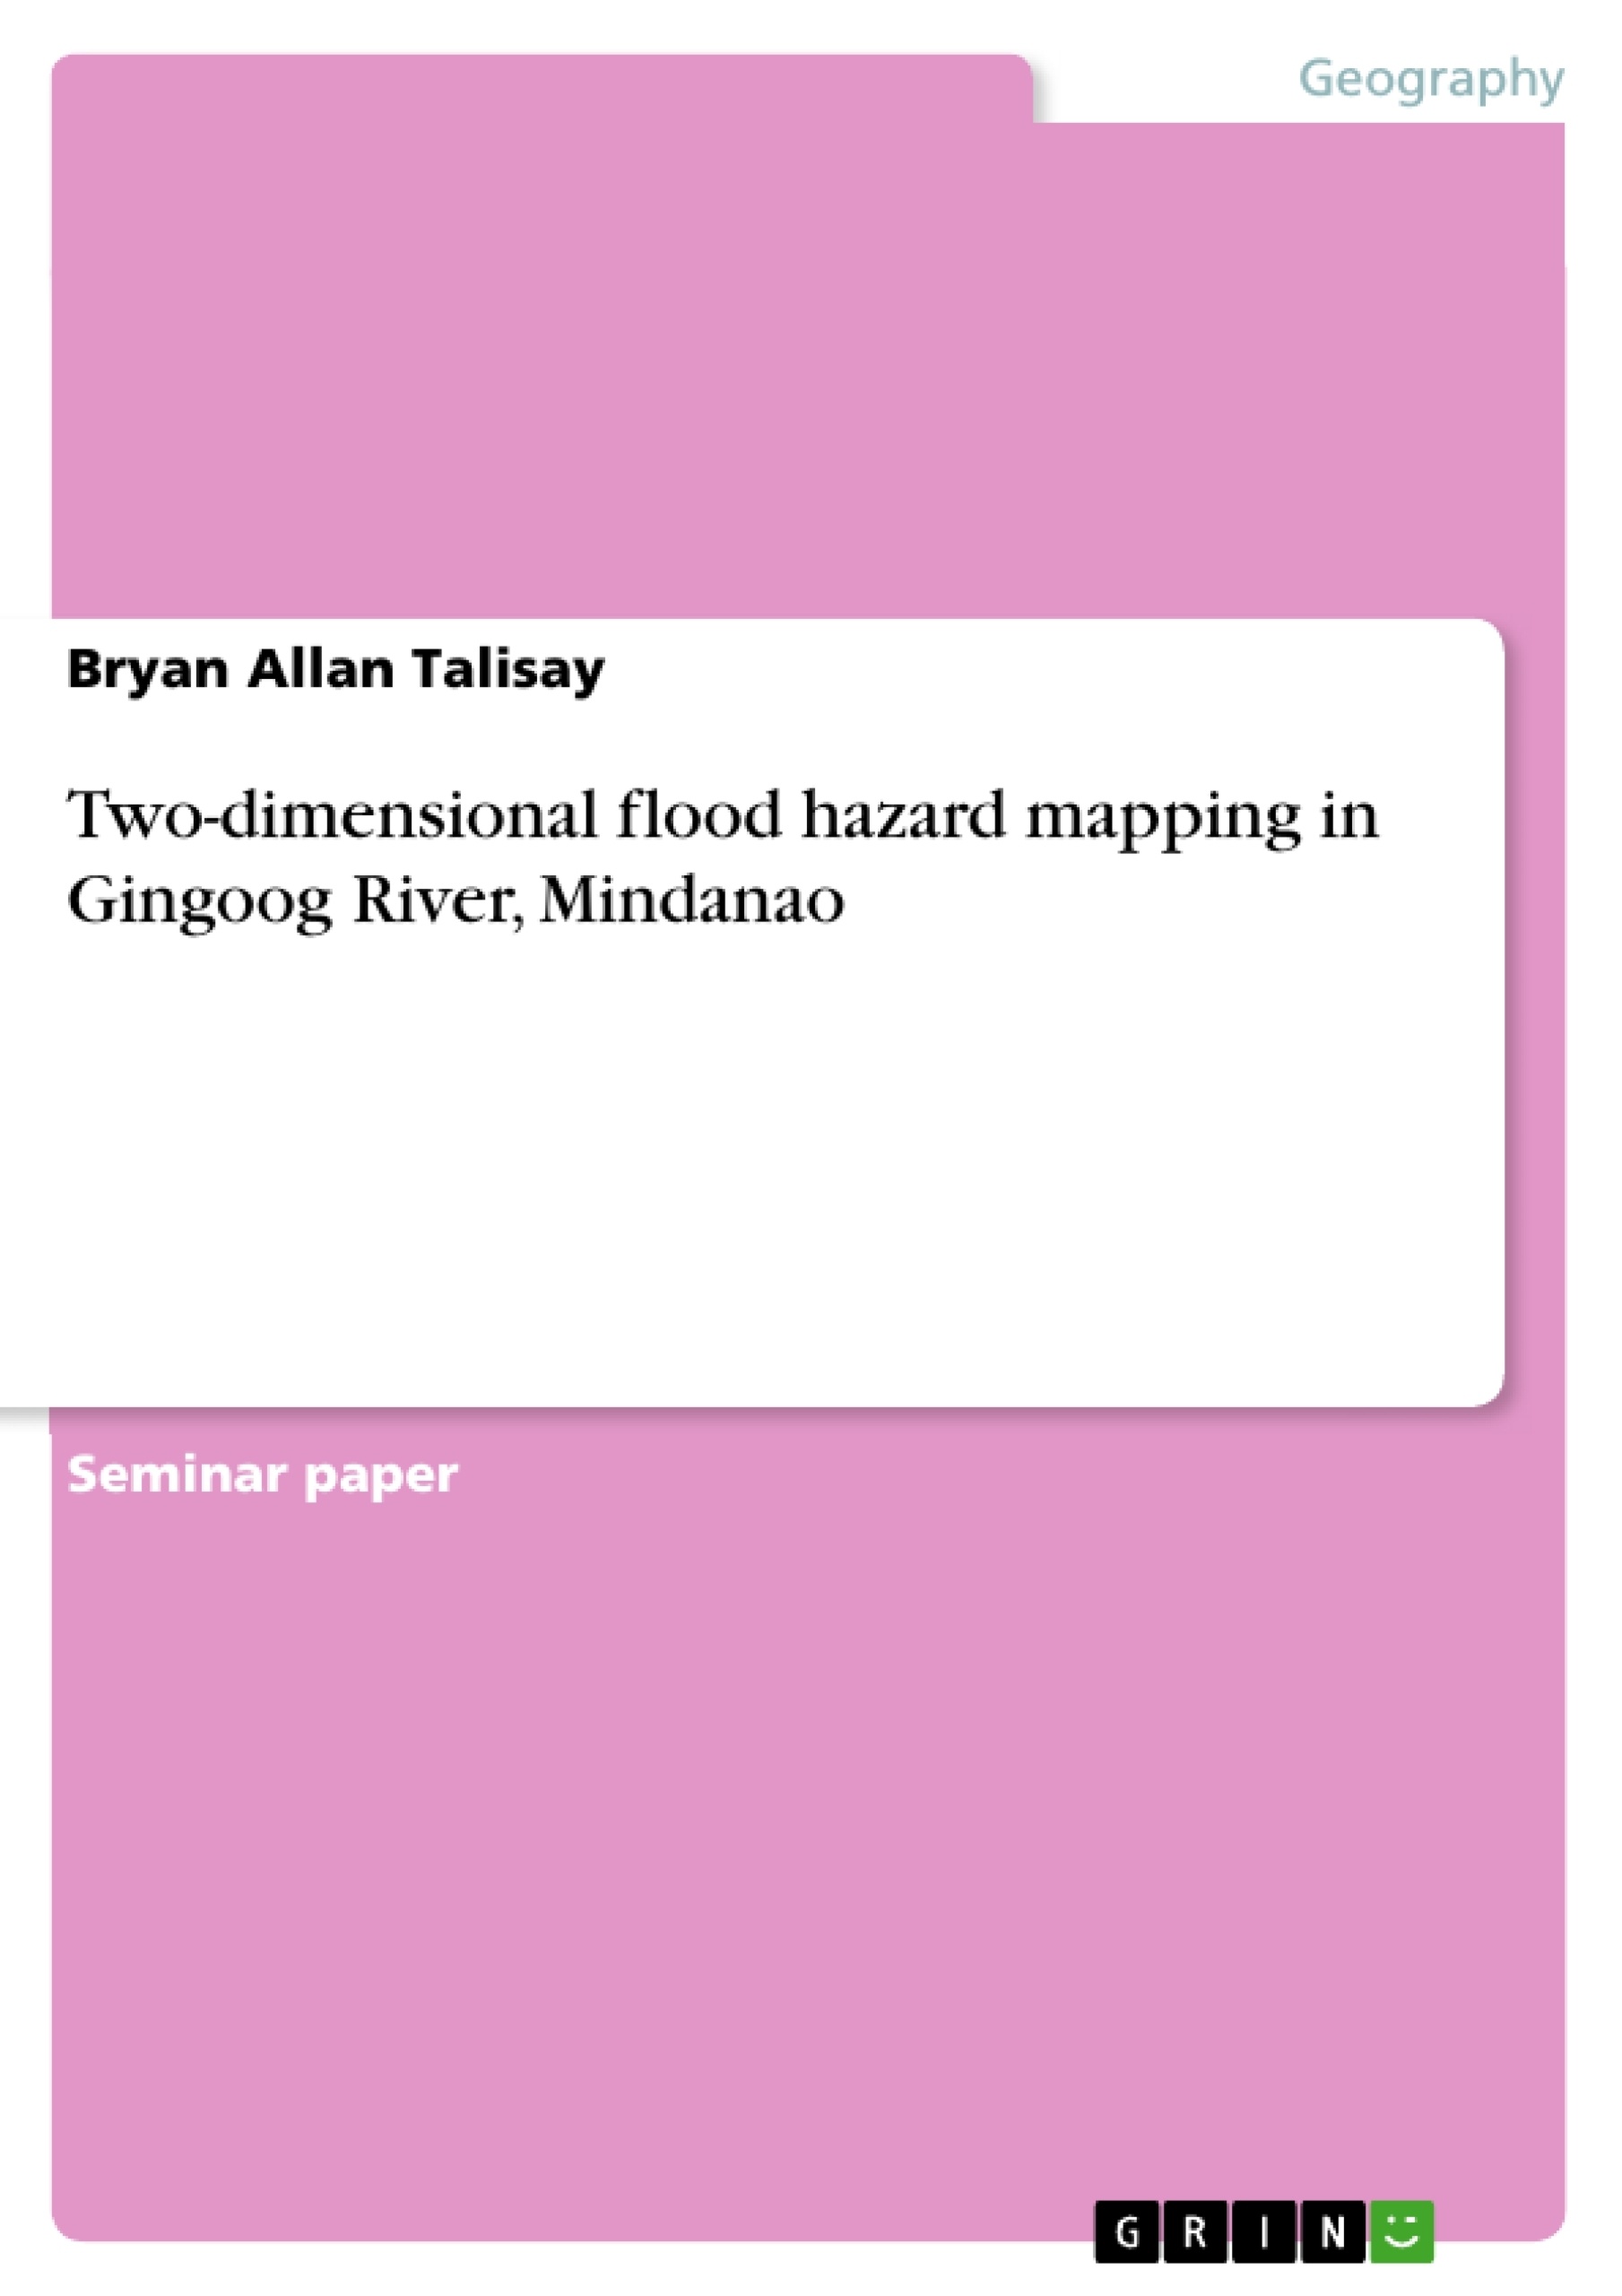 Title: Two-dimensional flood hazard mapping in Gingoog River, Mindanao